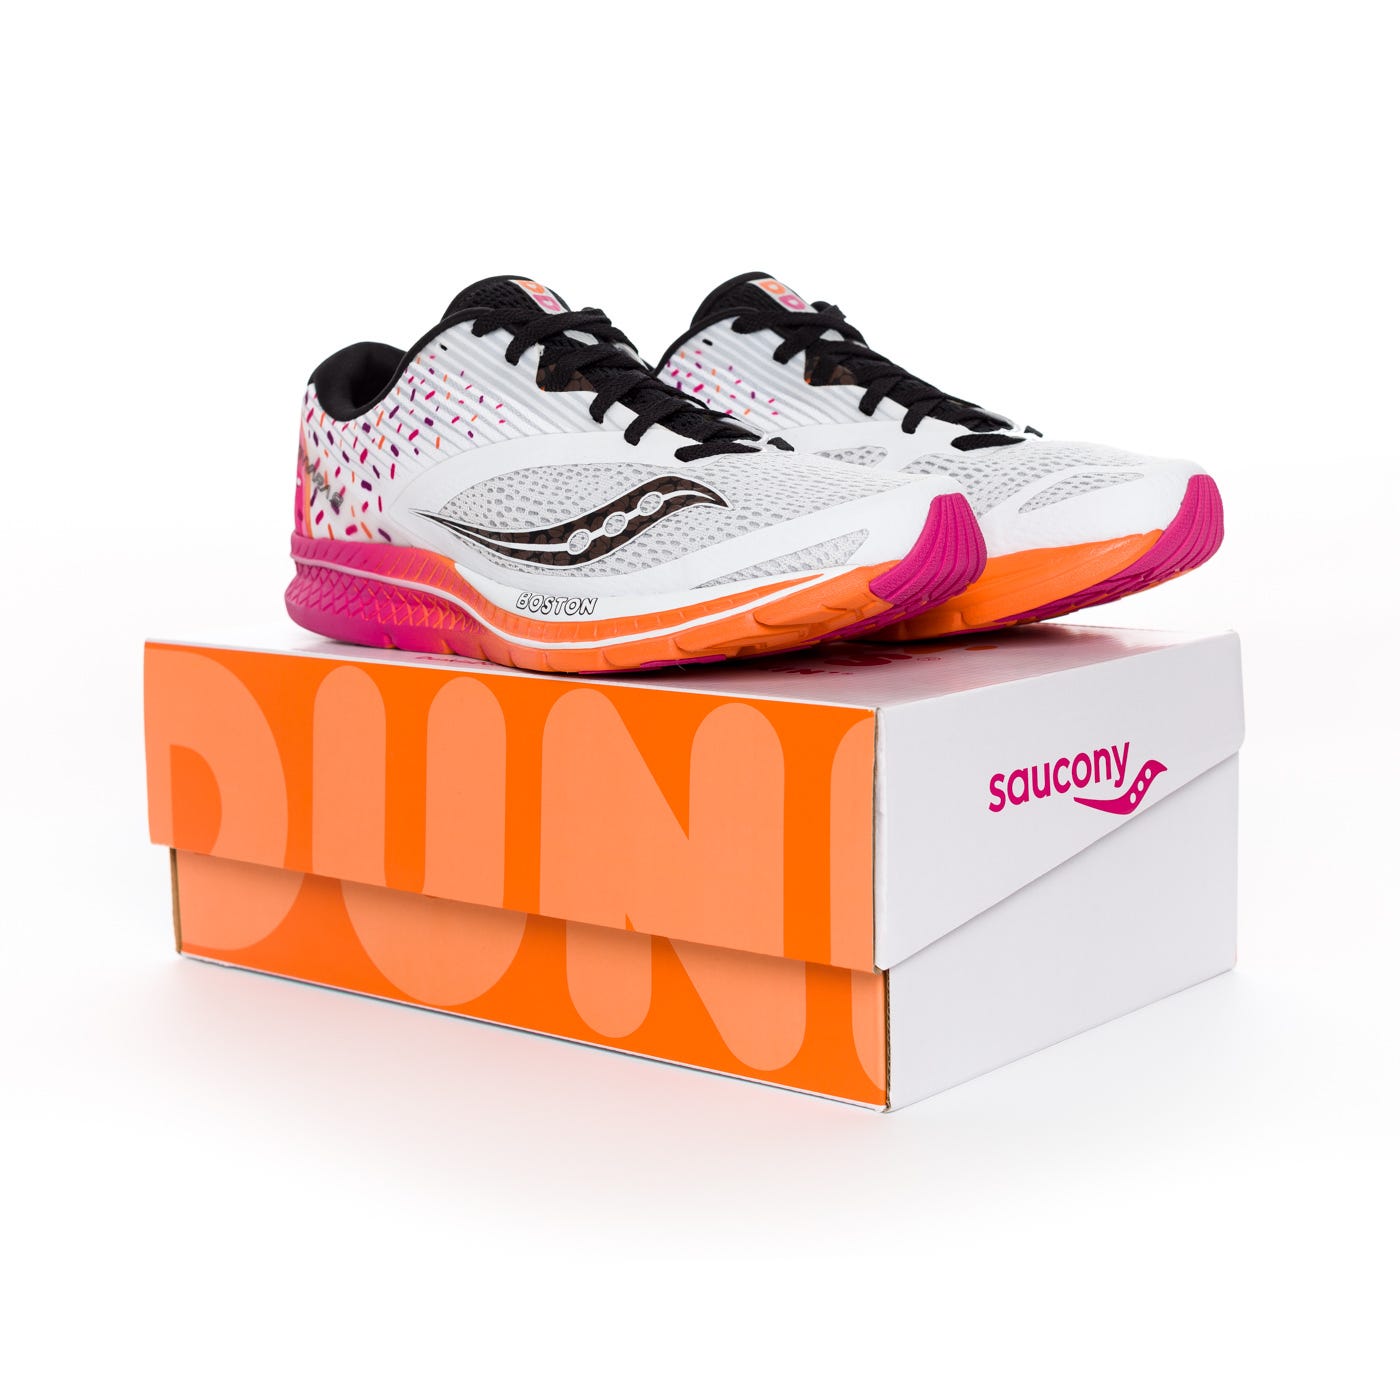 Dunkin' Donuts, Saucony launch a 